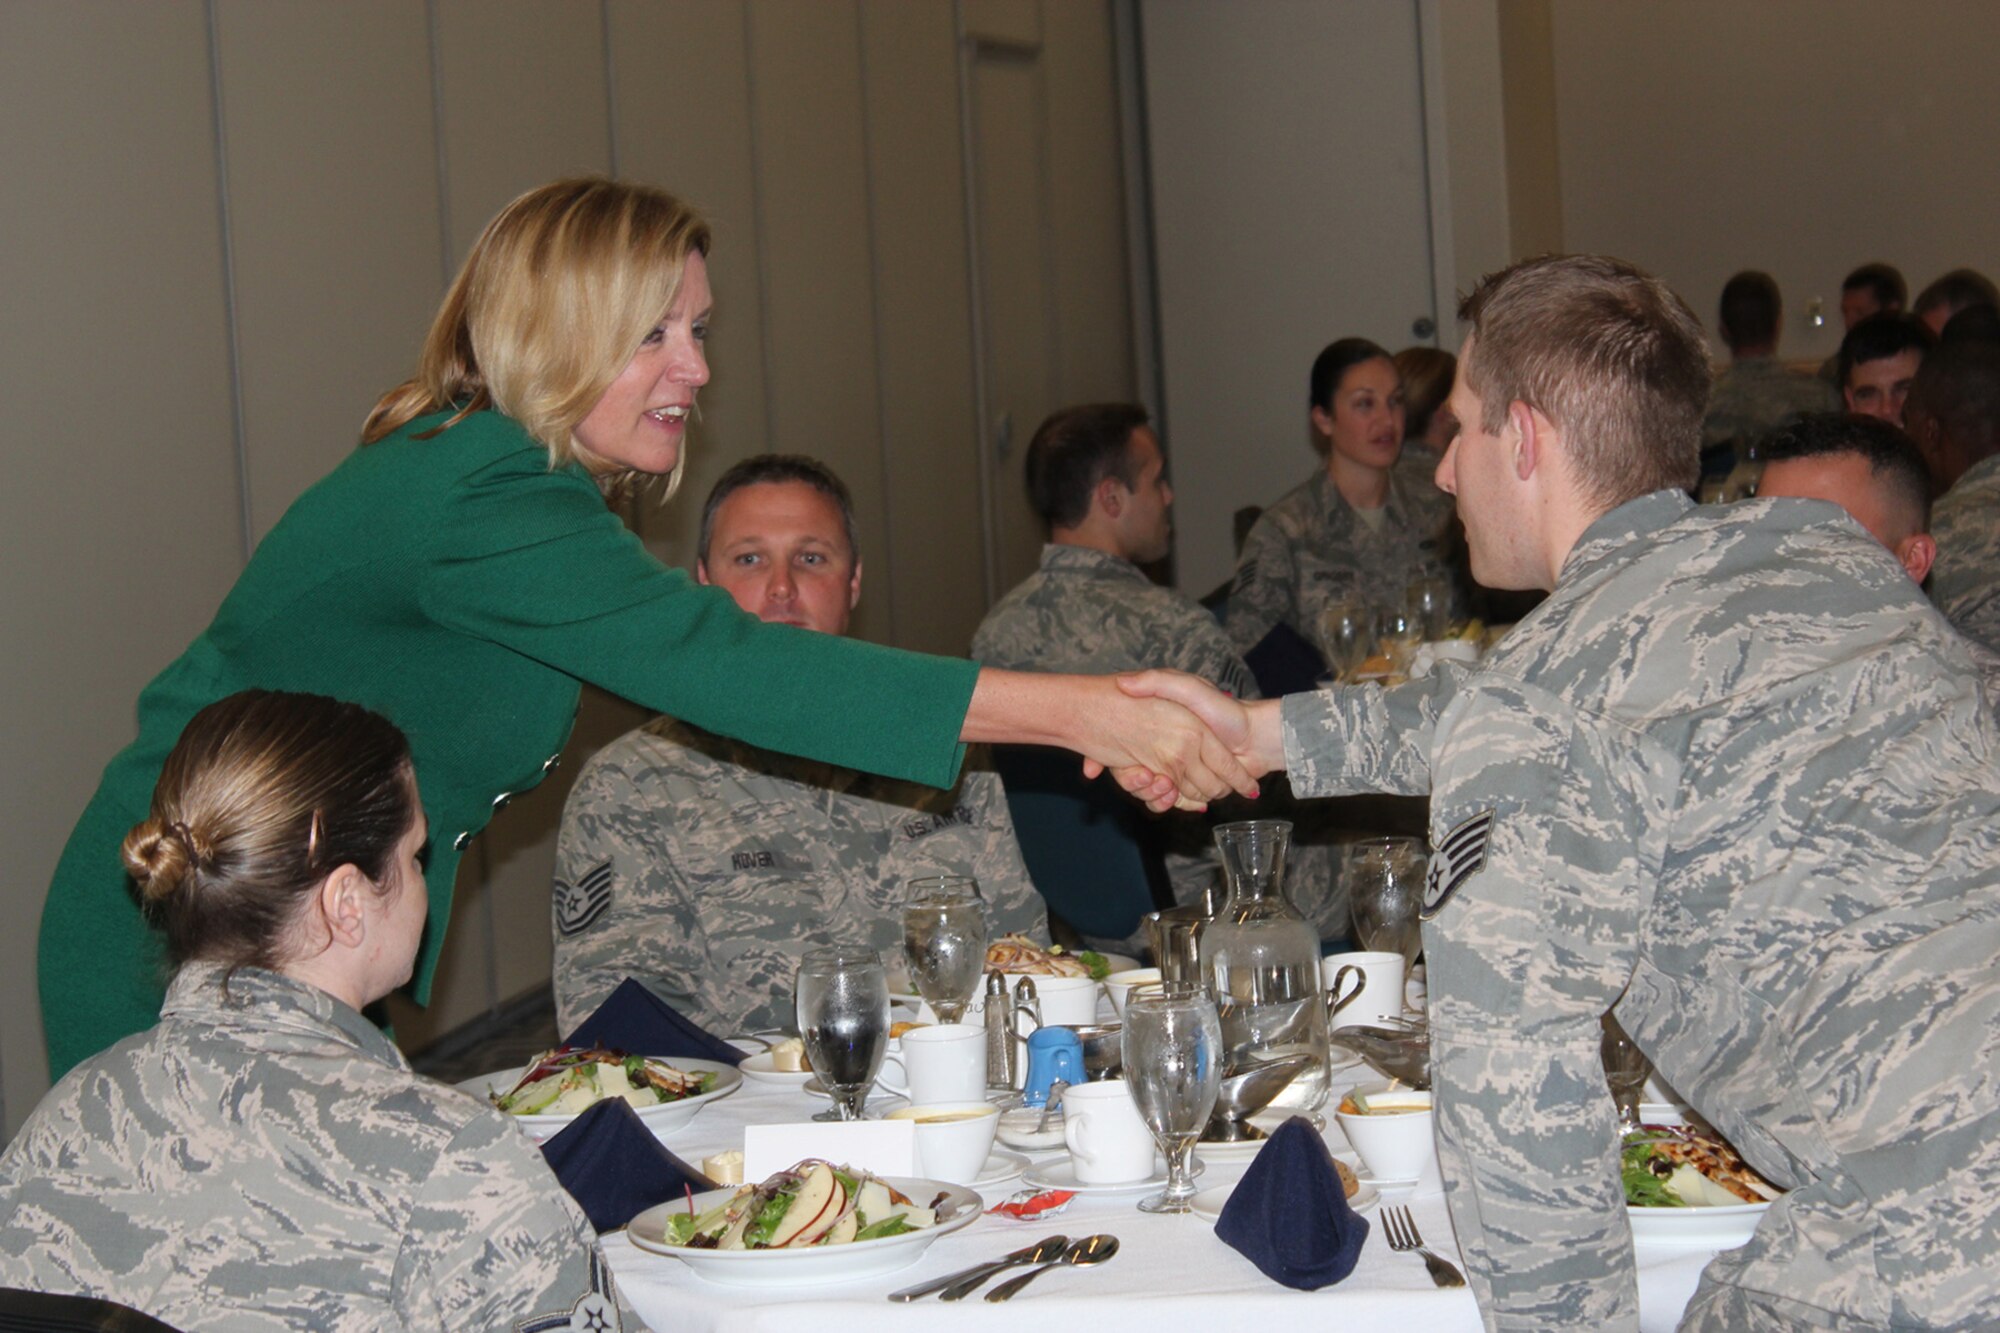 141106-Z-VP586-018 -- Secretary of the Air Force Deborah Lee James shakes hands with Staff Sgt. Kenneth Kirchoff during a lunch at Selfridge Air National Guard Base, Mich., Nov. 6, 2014. Secretary James' visit to Selfridge was her 50th such visit since she became secretary of the Air Force in December 2013. (U.S. Air National photo by Penny Carroll)